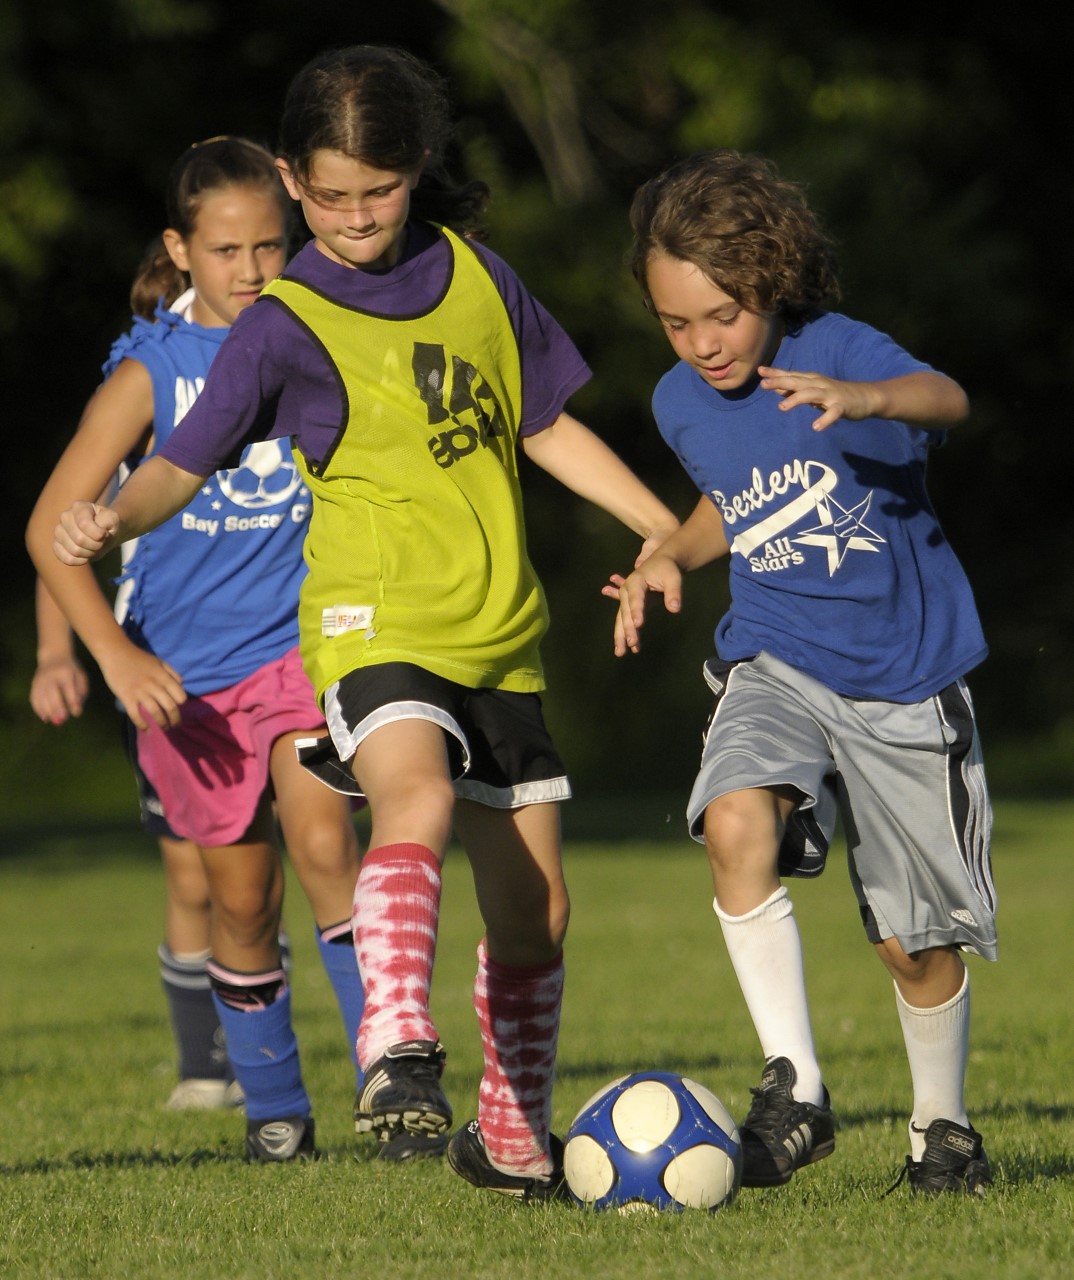 Two soccer players, a boy and girl, challenge for the ball